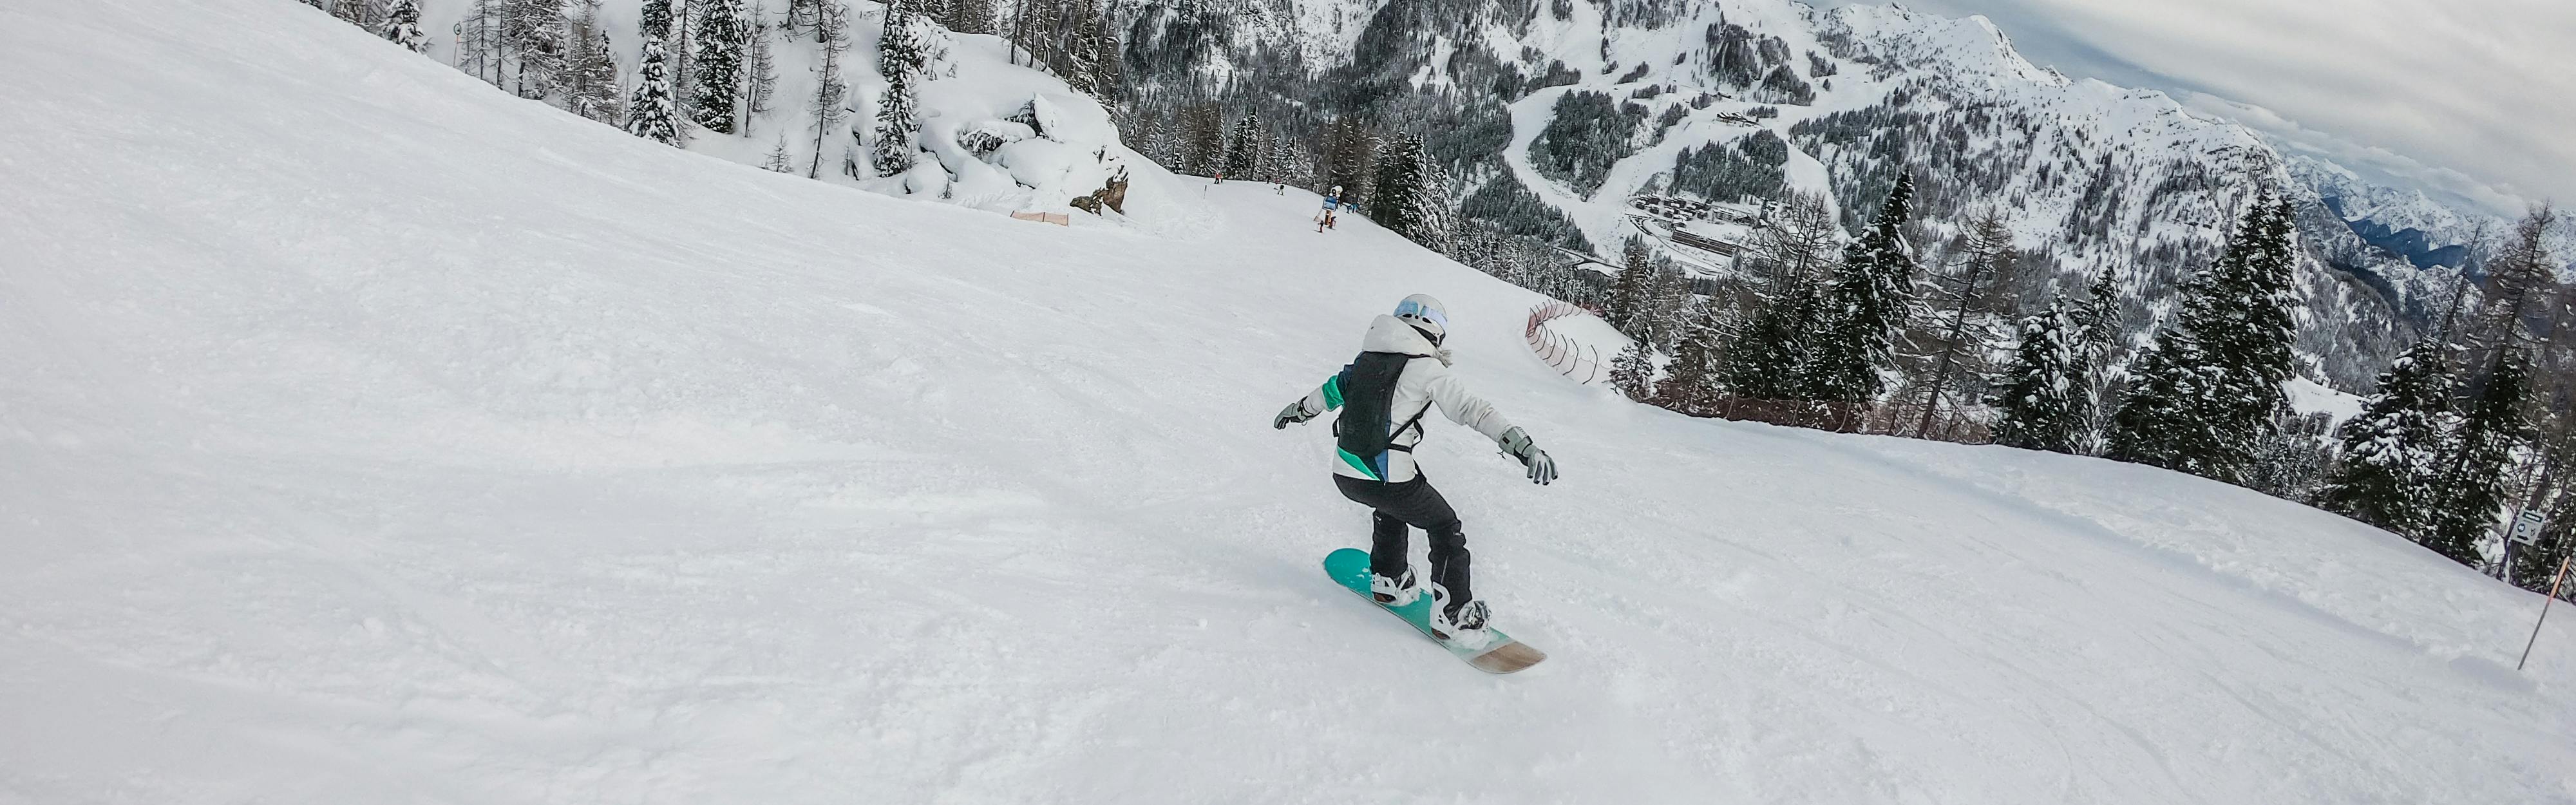 A woman snowboards carefully down a mountain